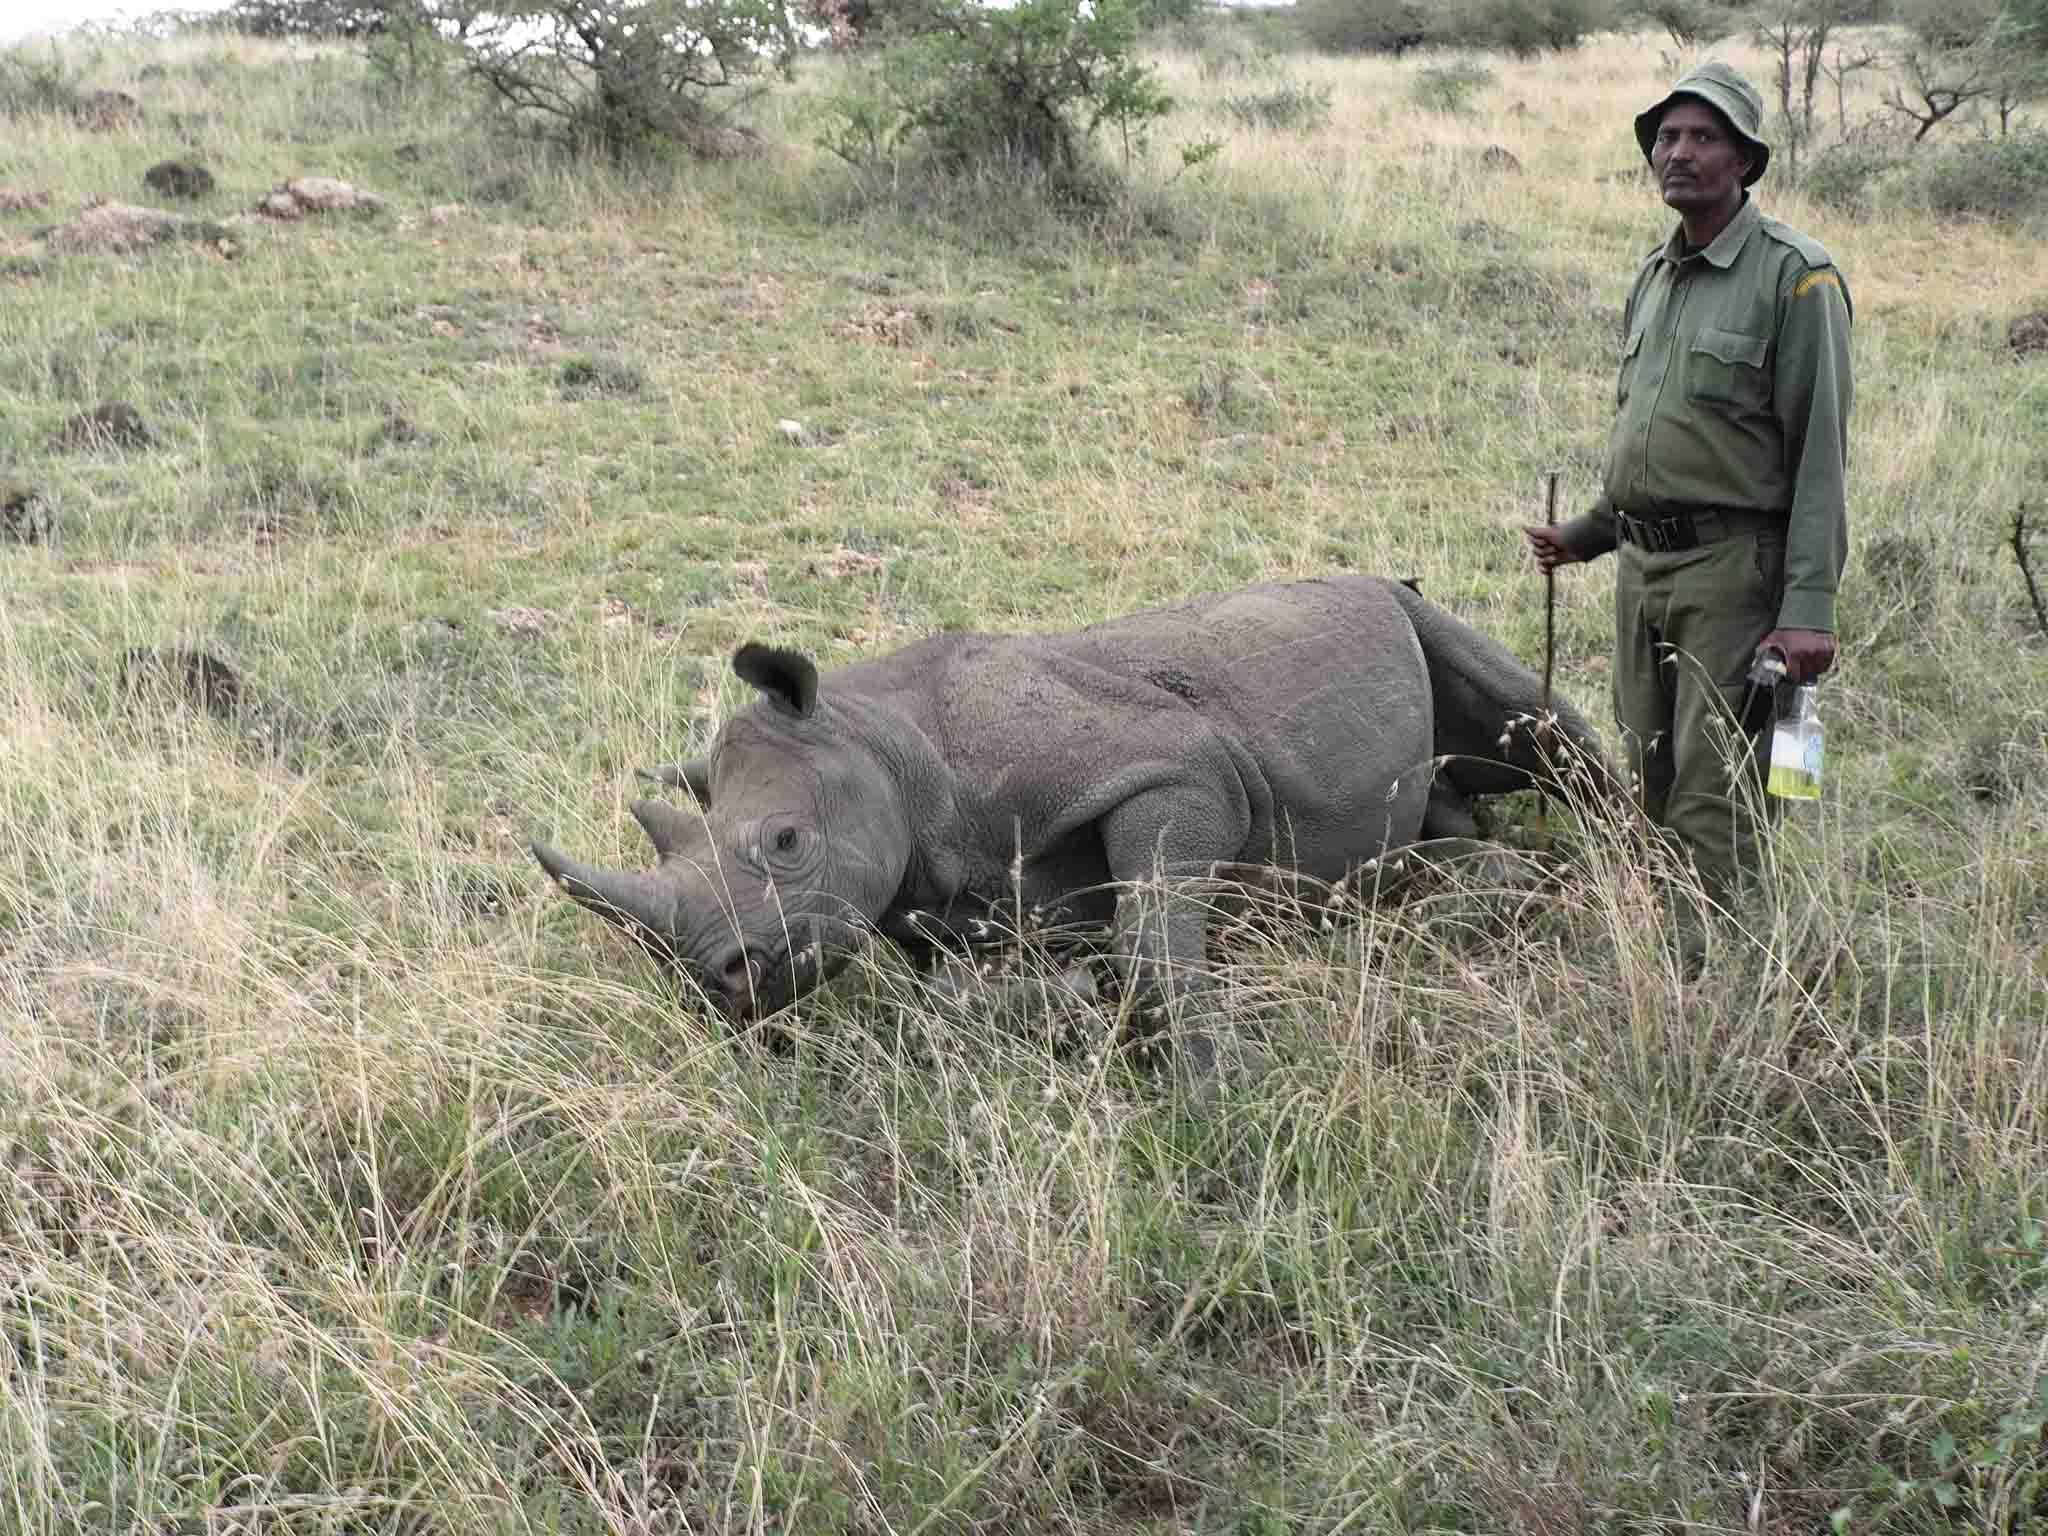 The fate of the rhino serves as a warning of what may befall Africa’s elephants if initiatives such as the Giants Club fail.